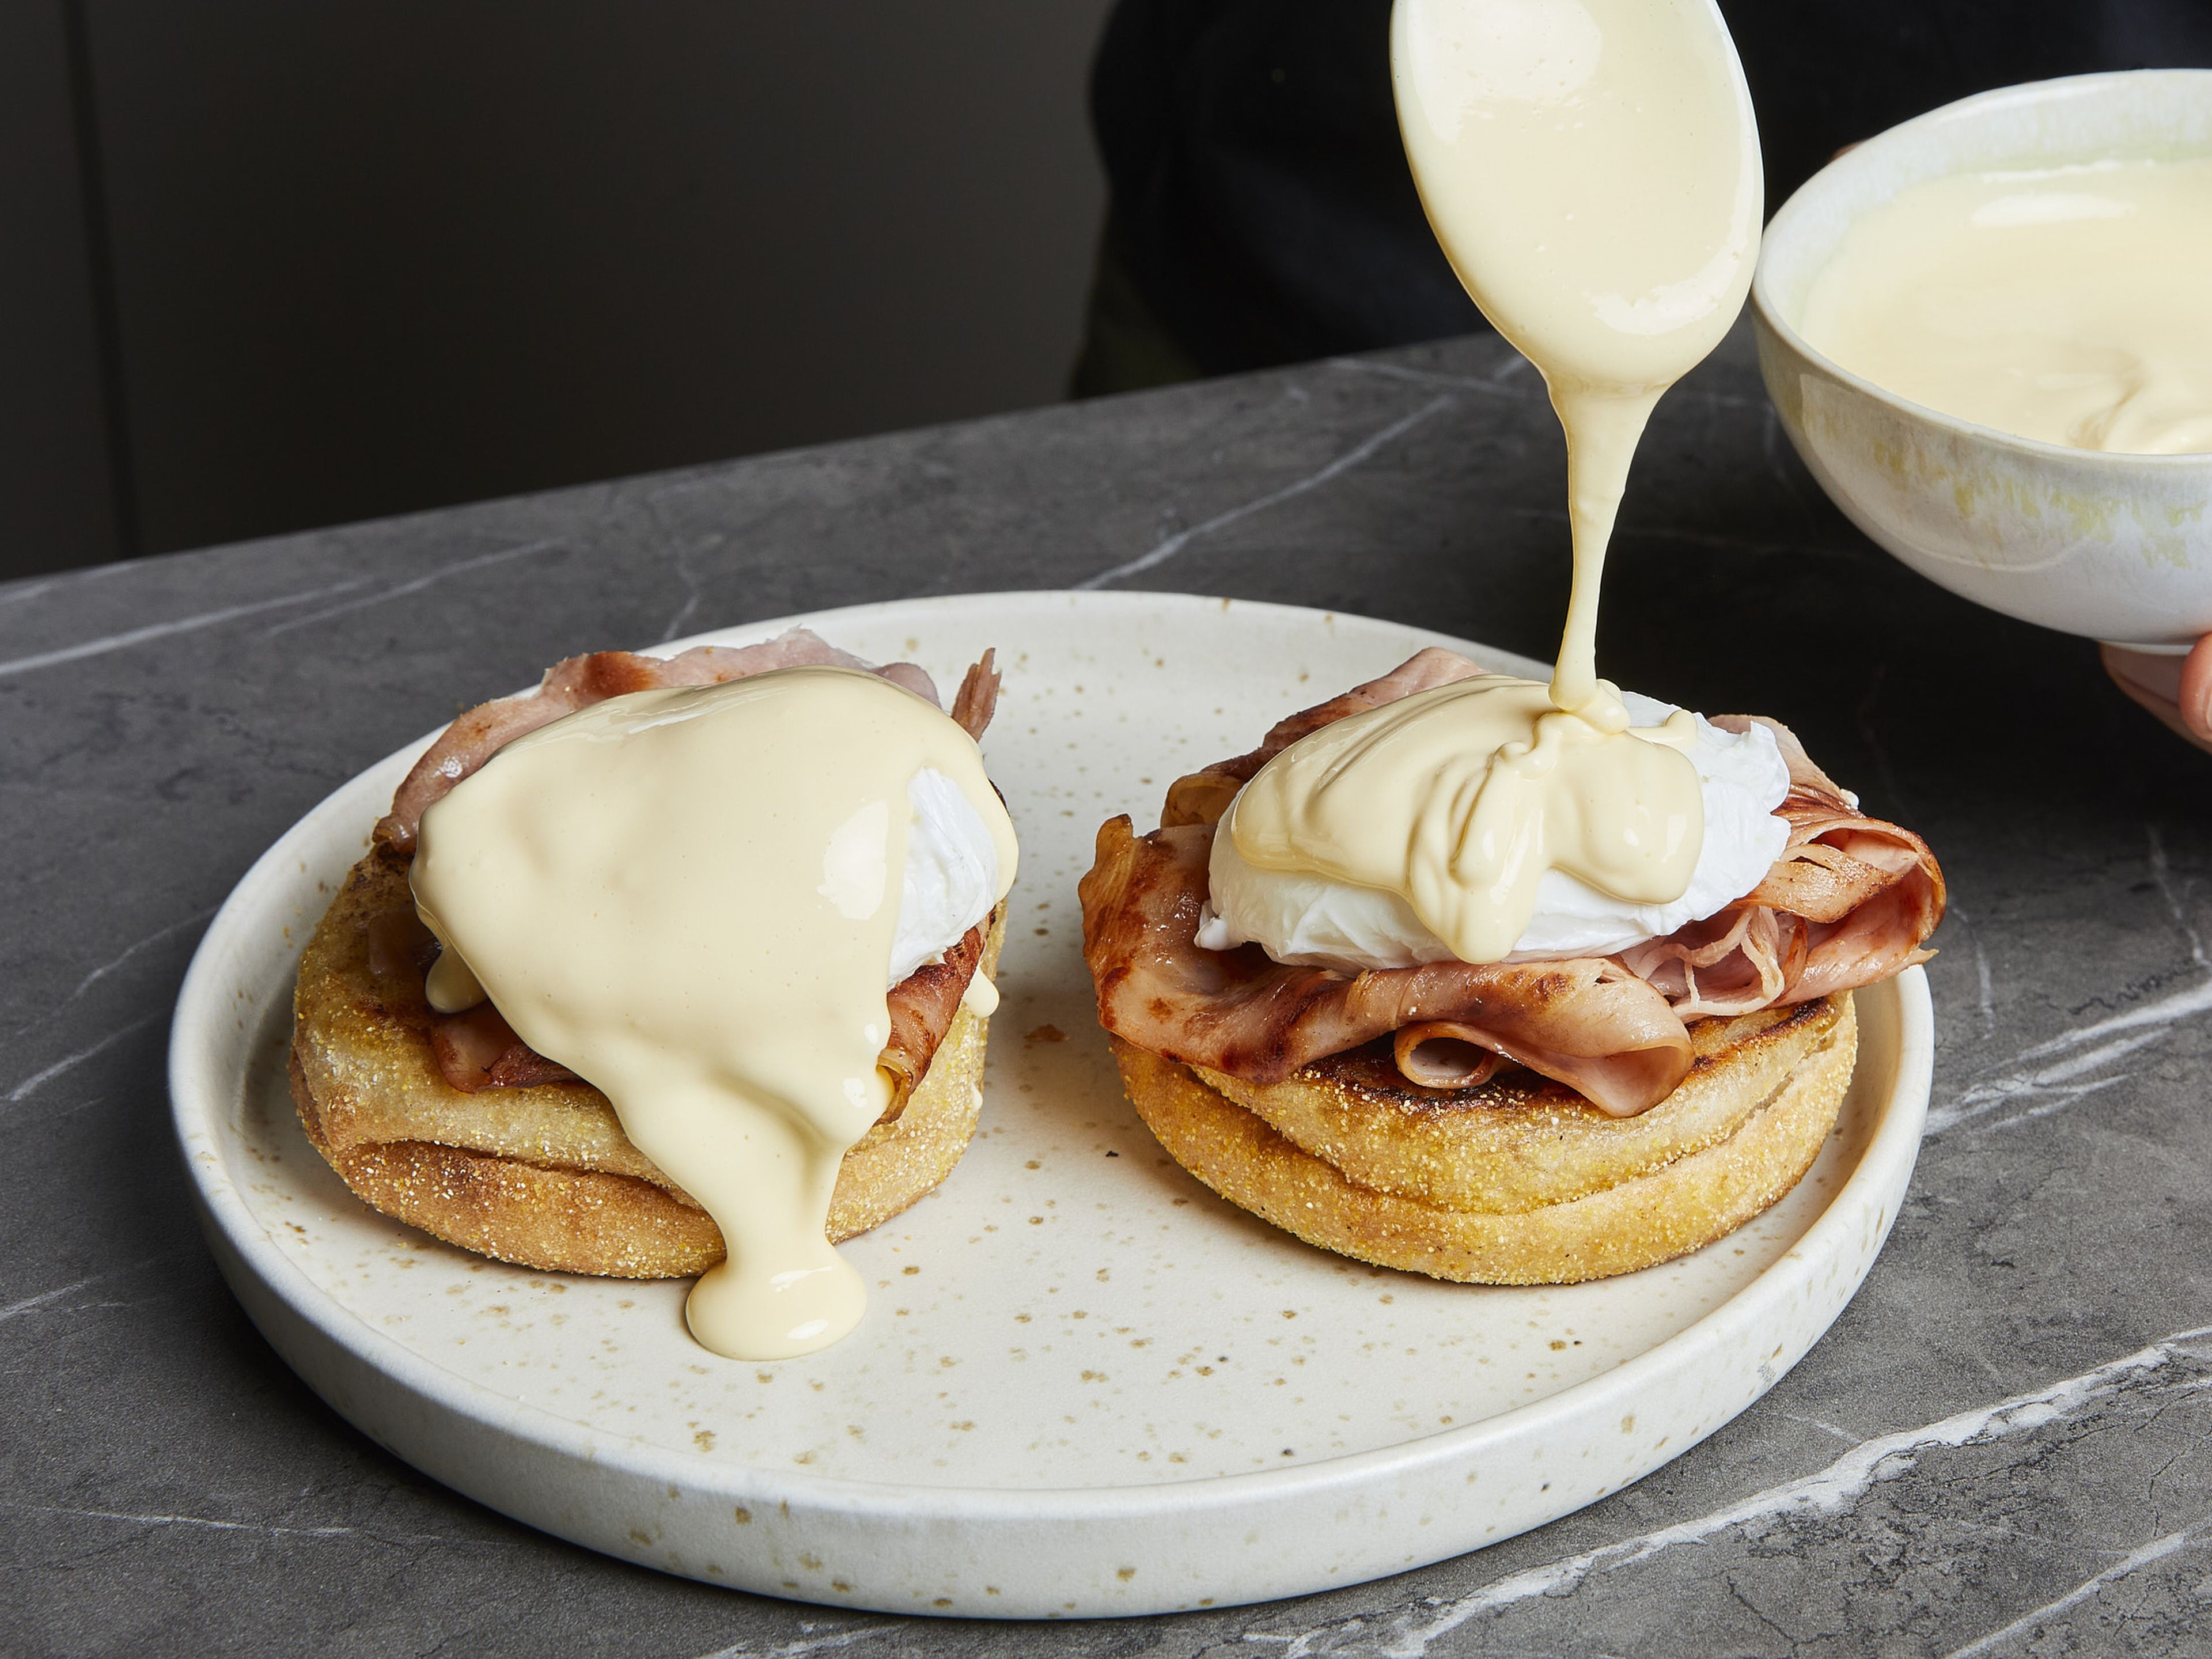 To assemble your Eggs Benedict, place a slice of cooked ham on each English muffin half, top with a poached egg and cover with hollandaise sauce. Season with salt and pepper and garnish with chives if desired.